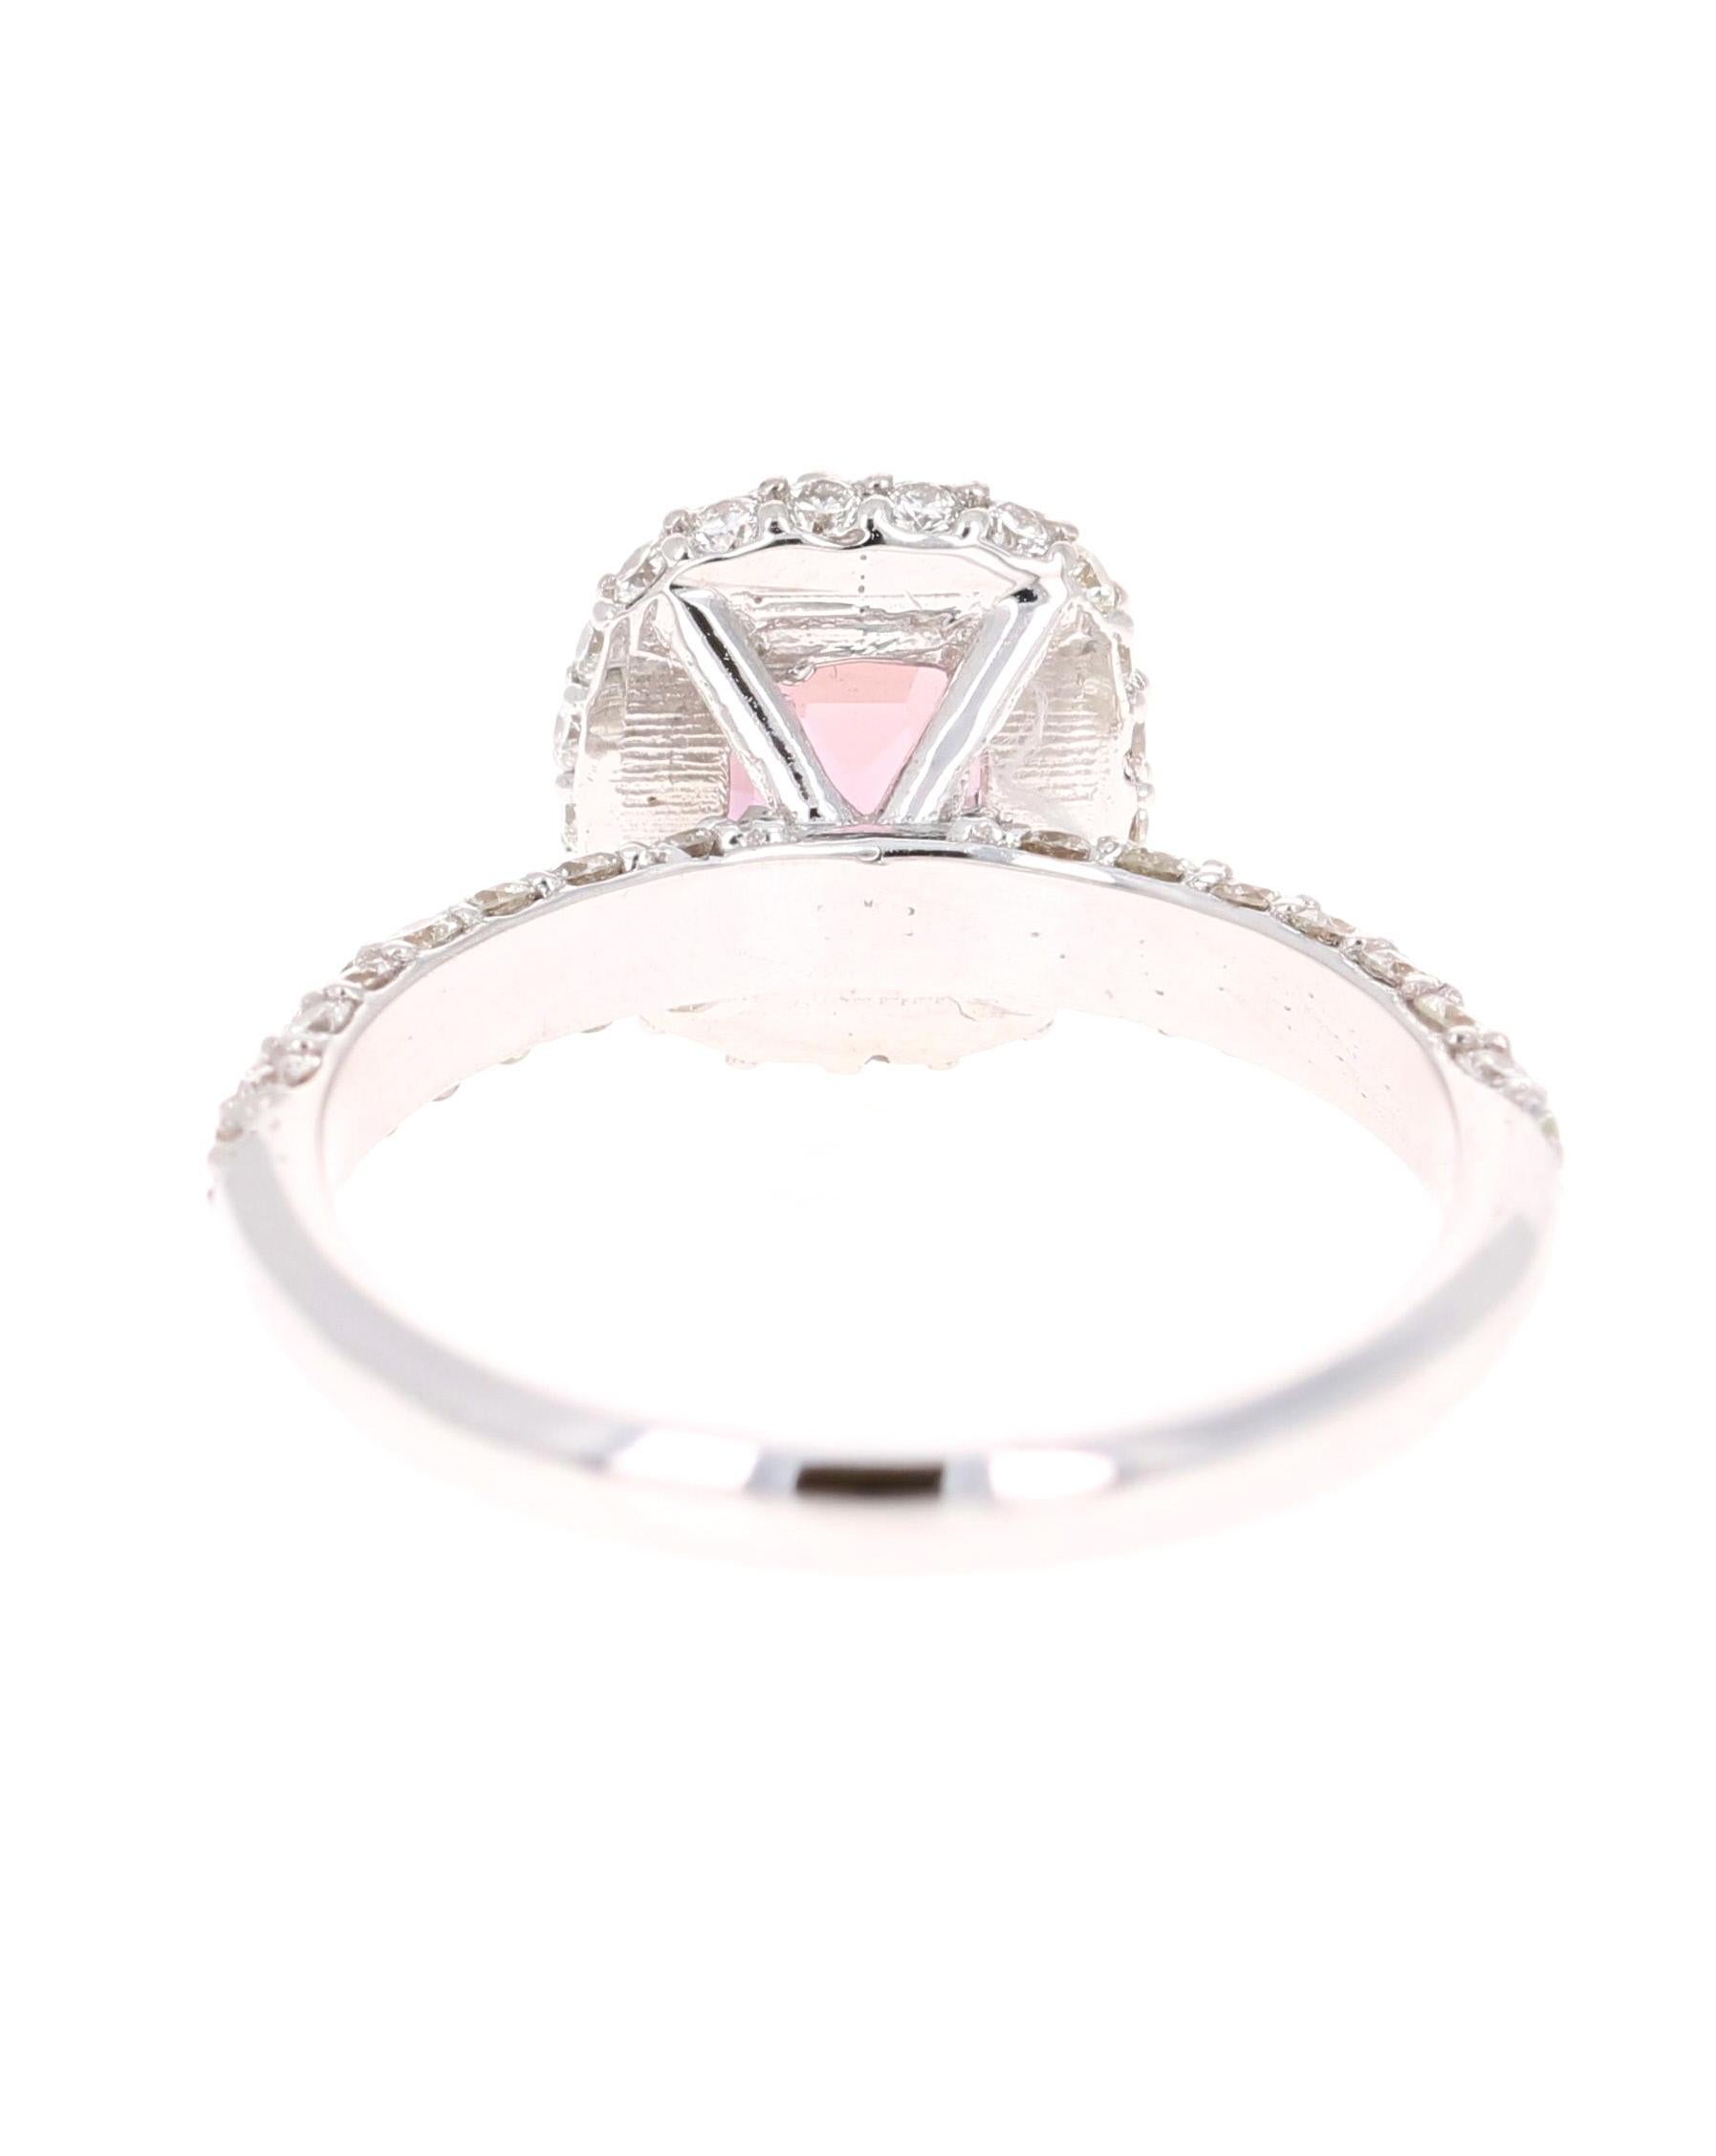 Emerald Cut GIA Certified 2.44 Carat Pink Sapphire Diamond White Gold Engagement Ring For Sale